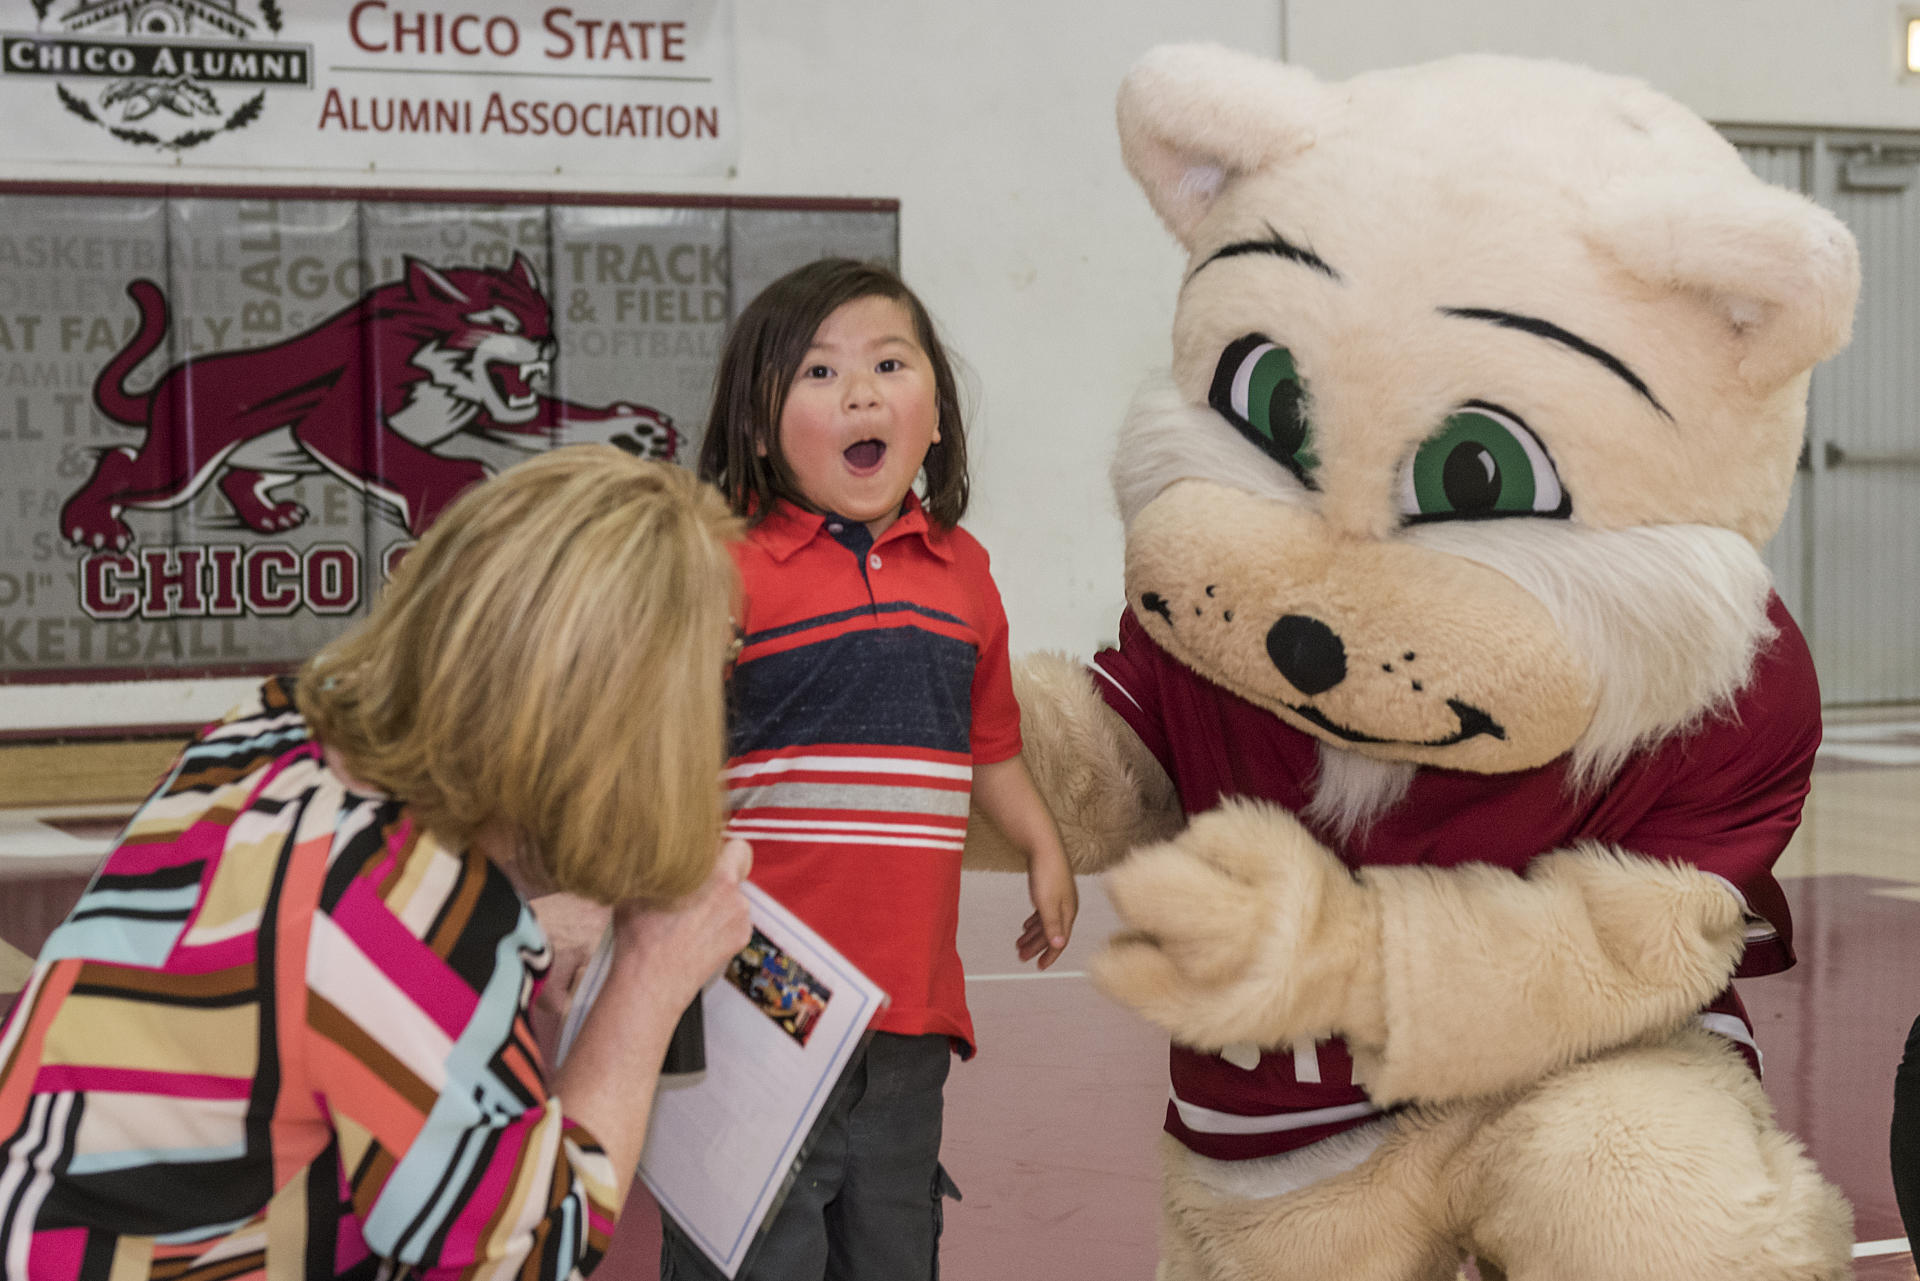 Willie the Wildcat mascot and a Make a Wish representative crouch next to a surprised child